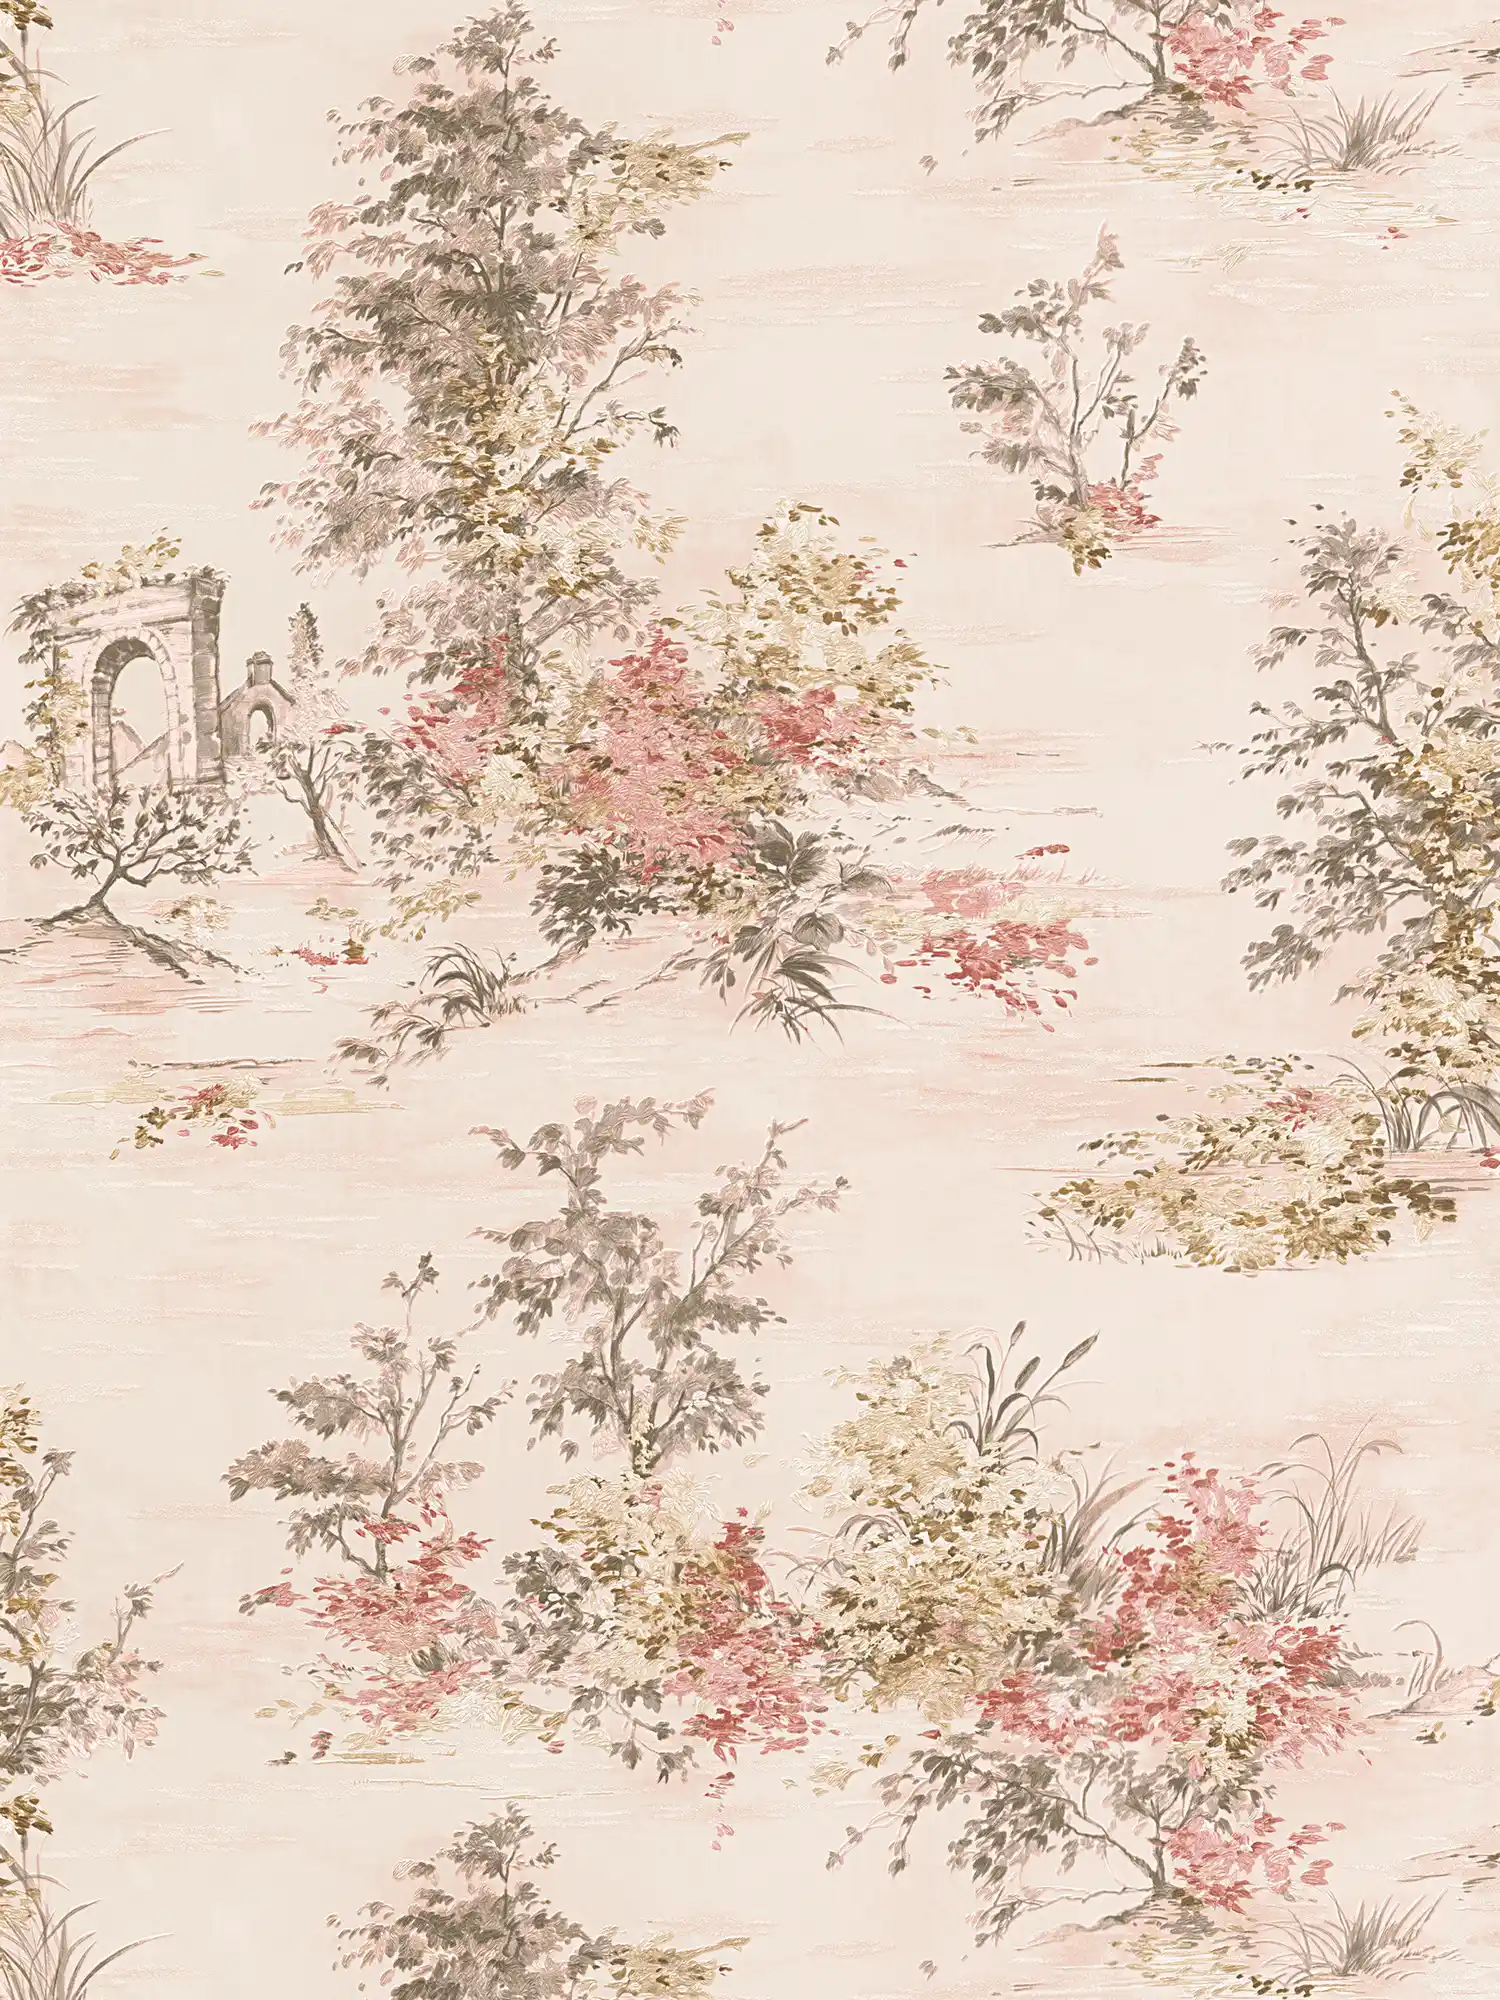 Wallpaper with landscape motif in classic style - red, pink, grey, cream
